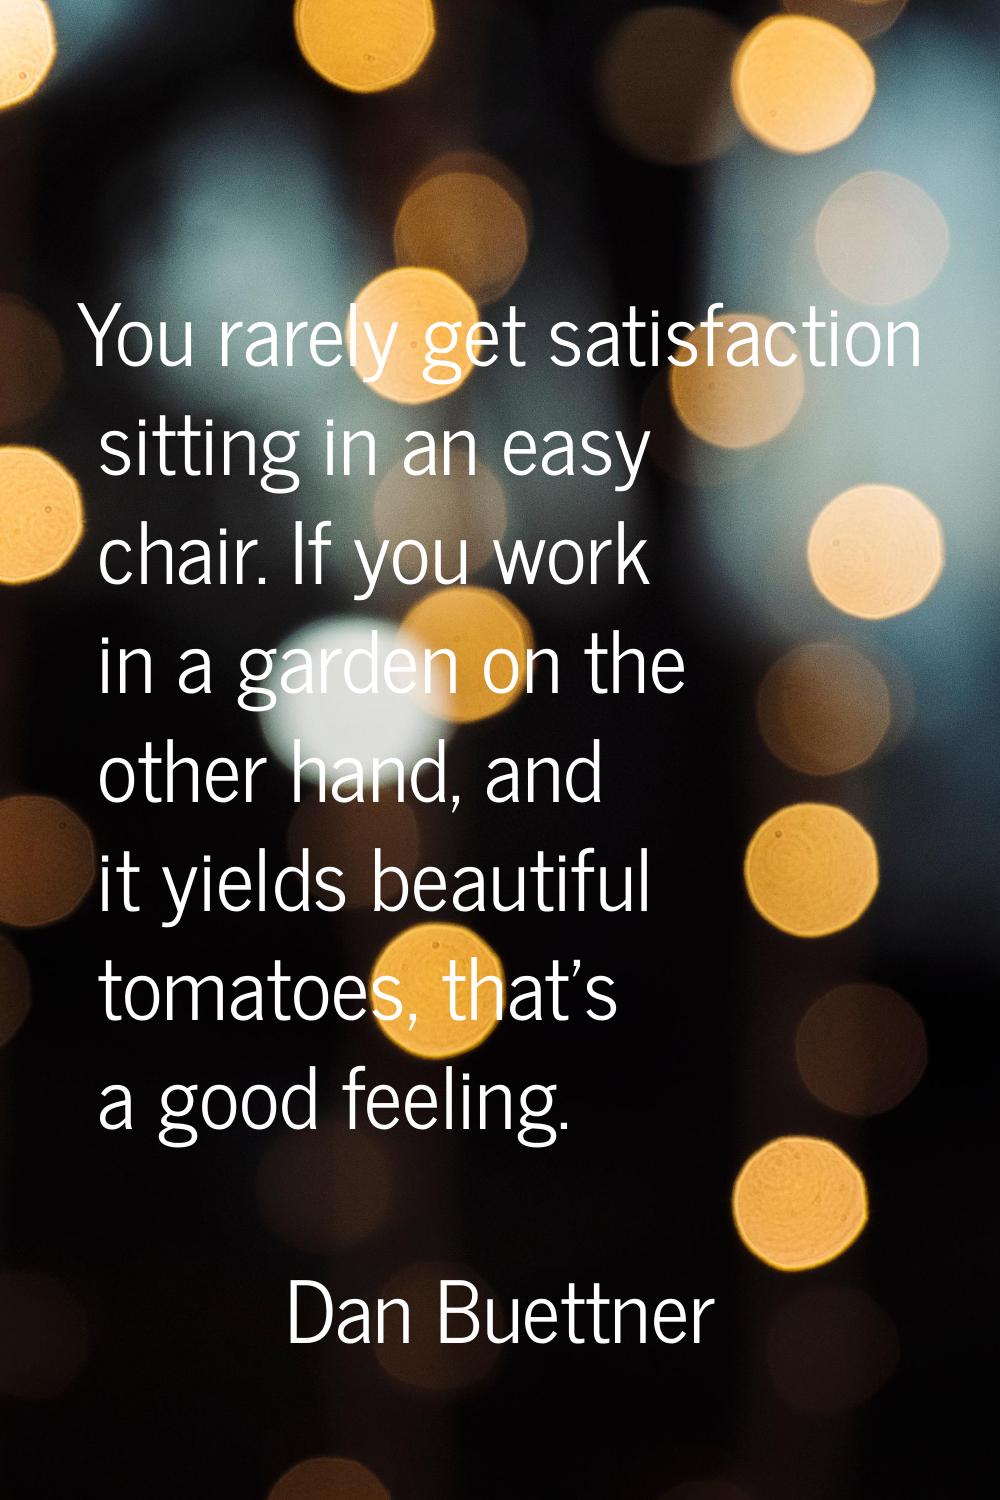 You rarely get satisfaction sitting in an easy chair. If you work in a garden on the other hand, an